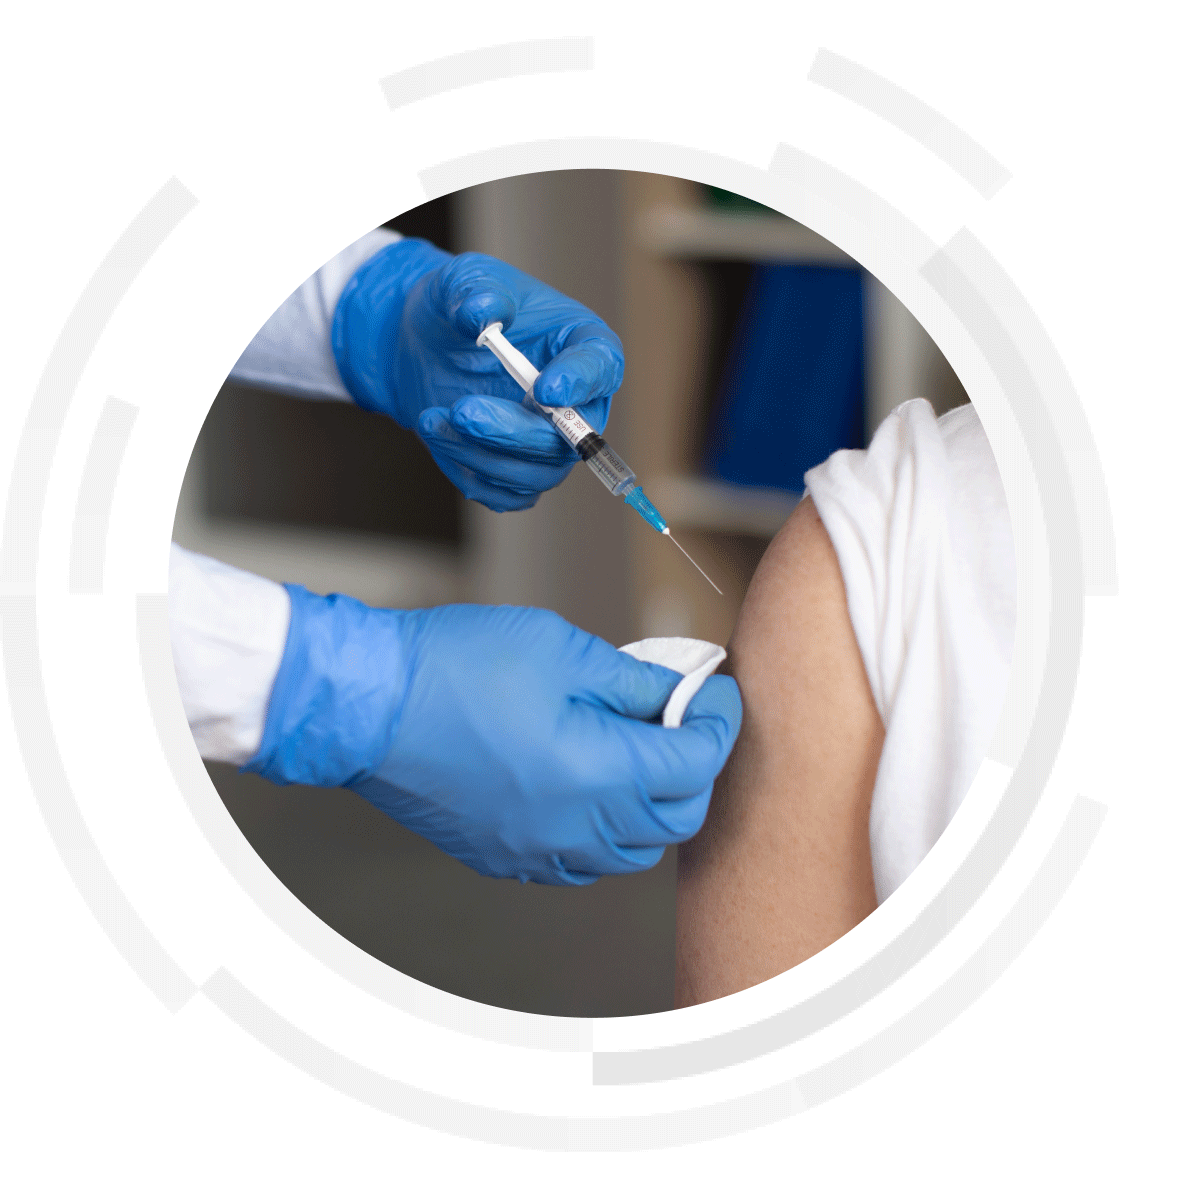 Man getting a vaccination in the arm.